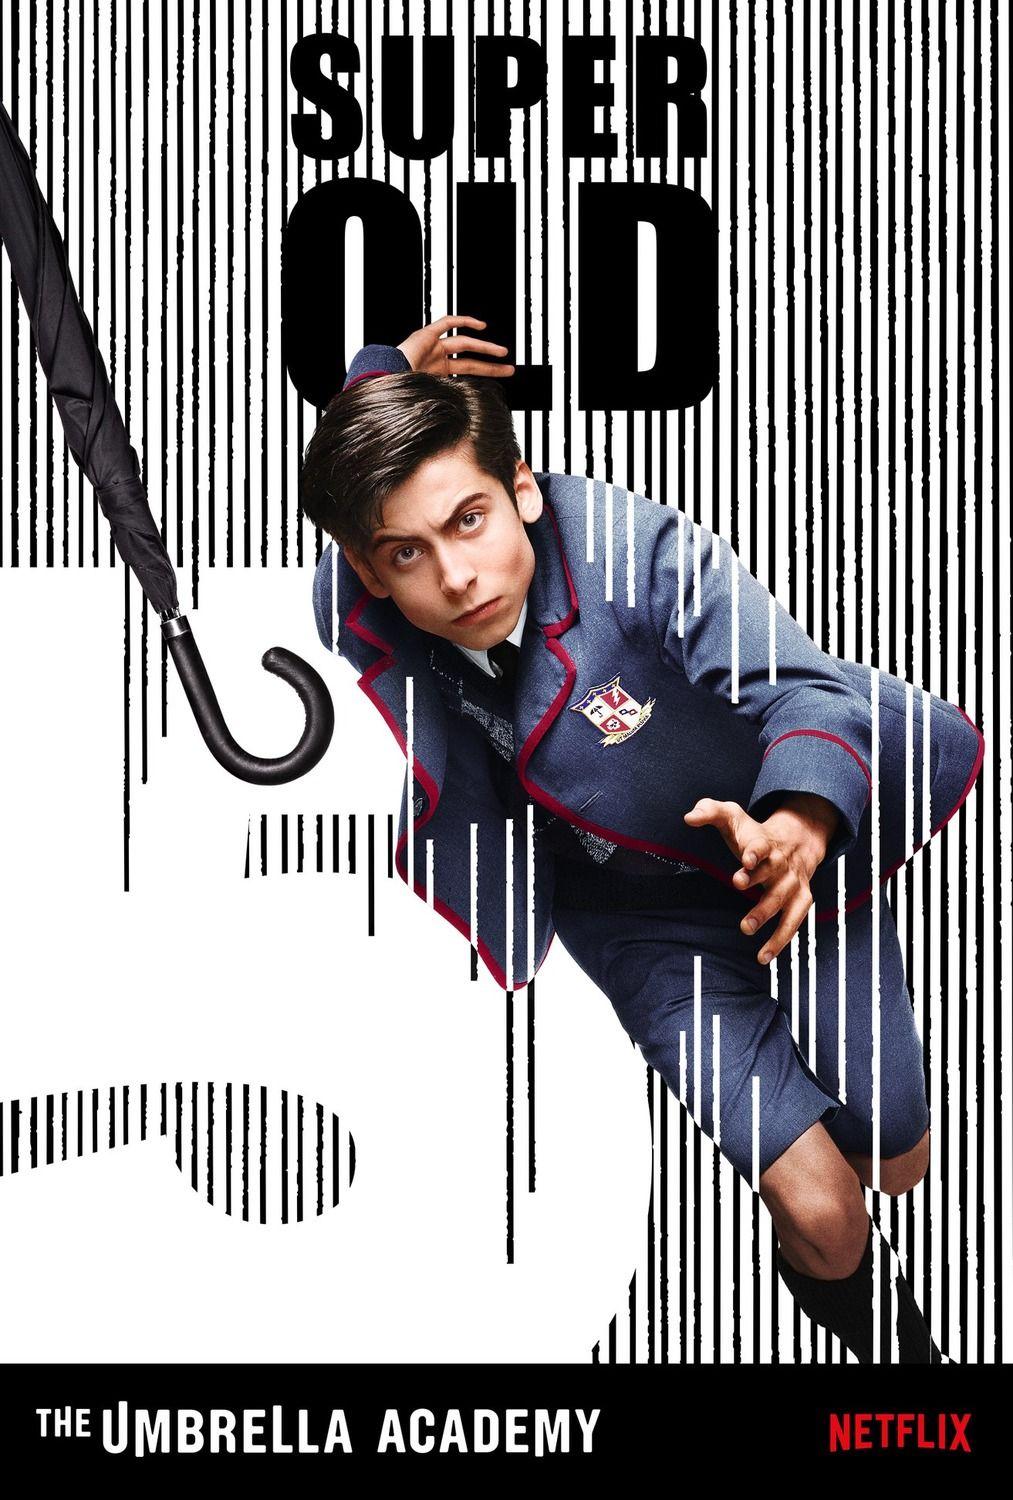 Return to the main poster page for The Umbrella Academy of 10